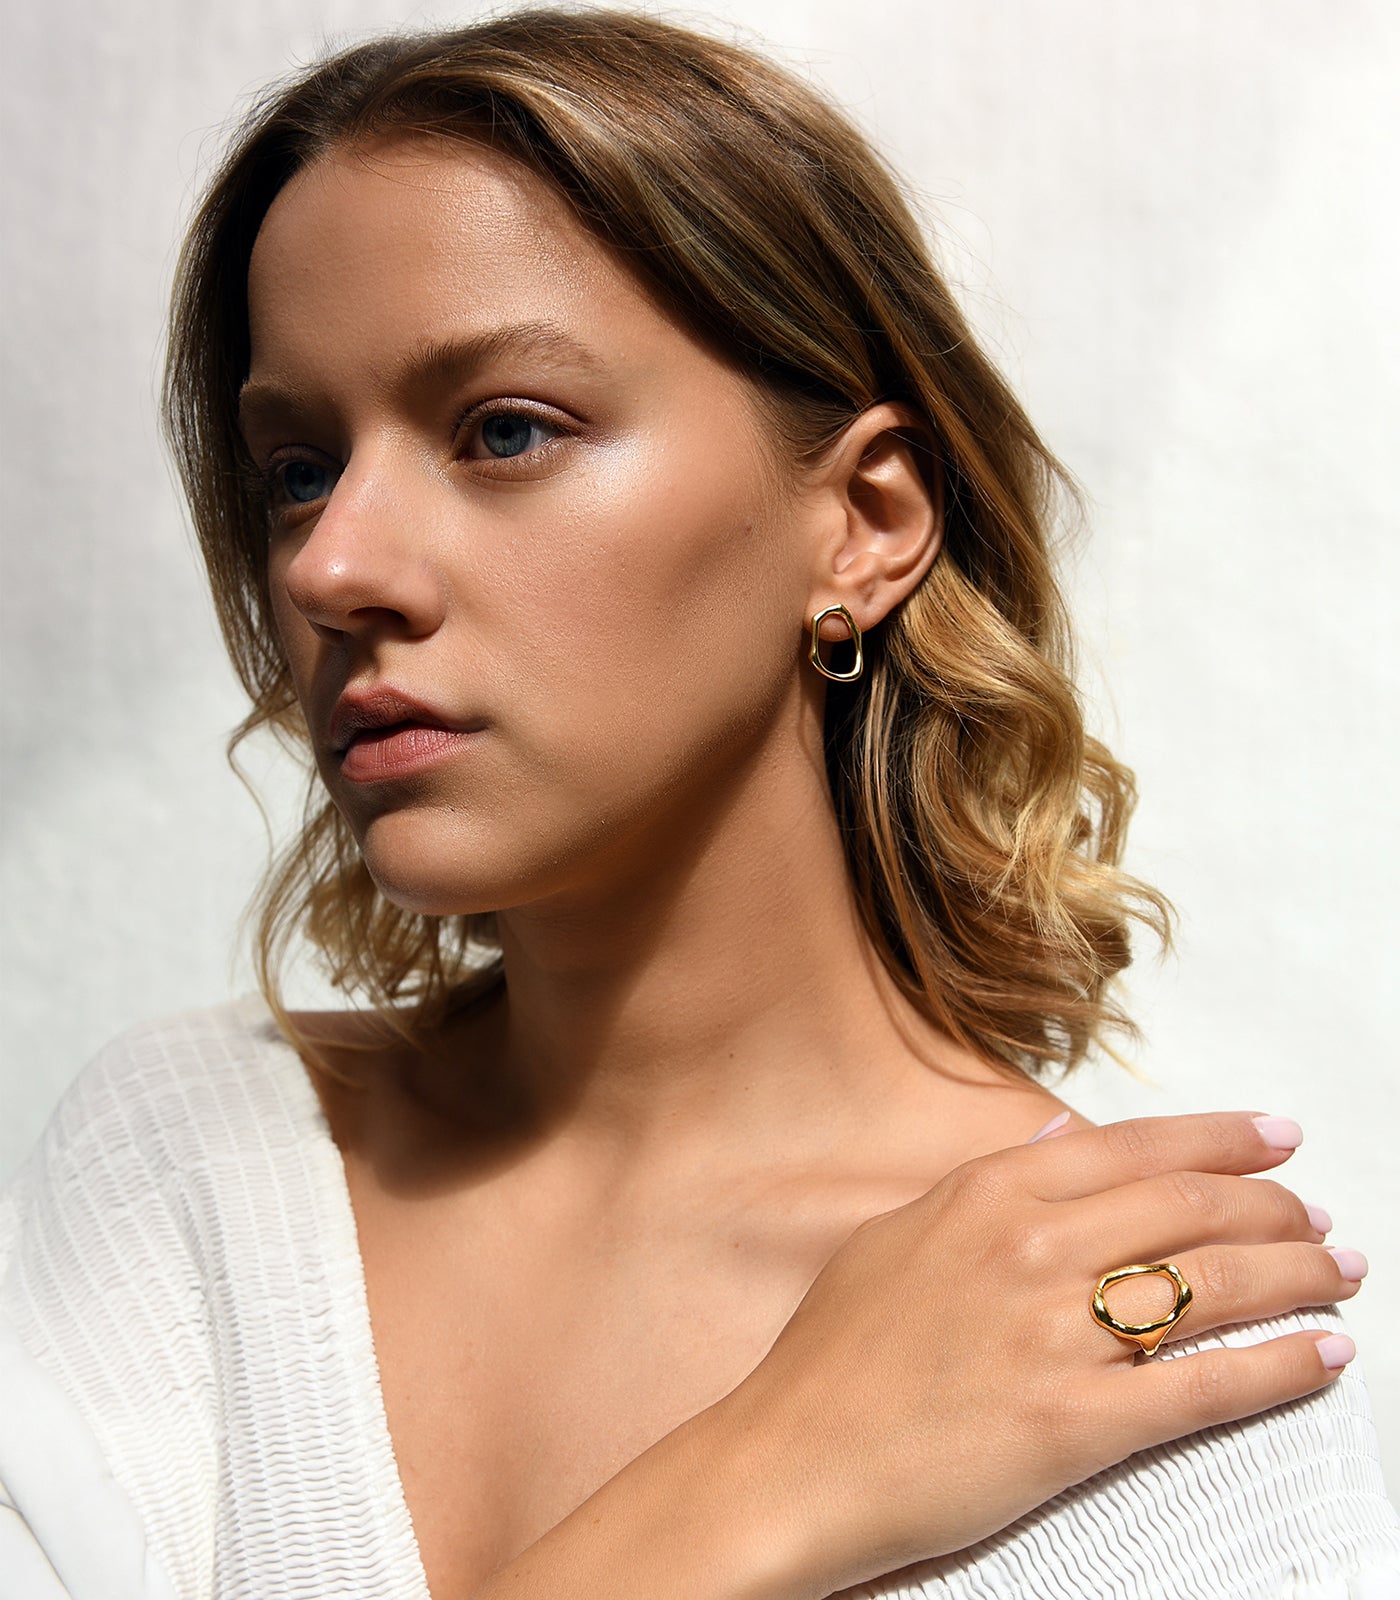 A model wears a gold vermeil ring with an oval shape at the front of the ring.